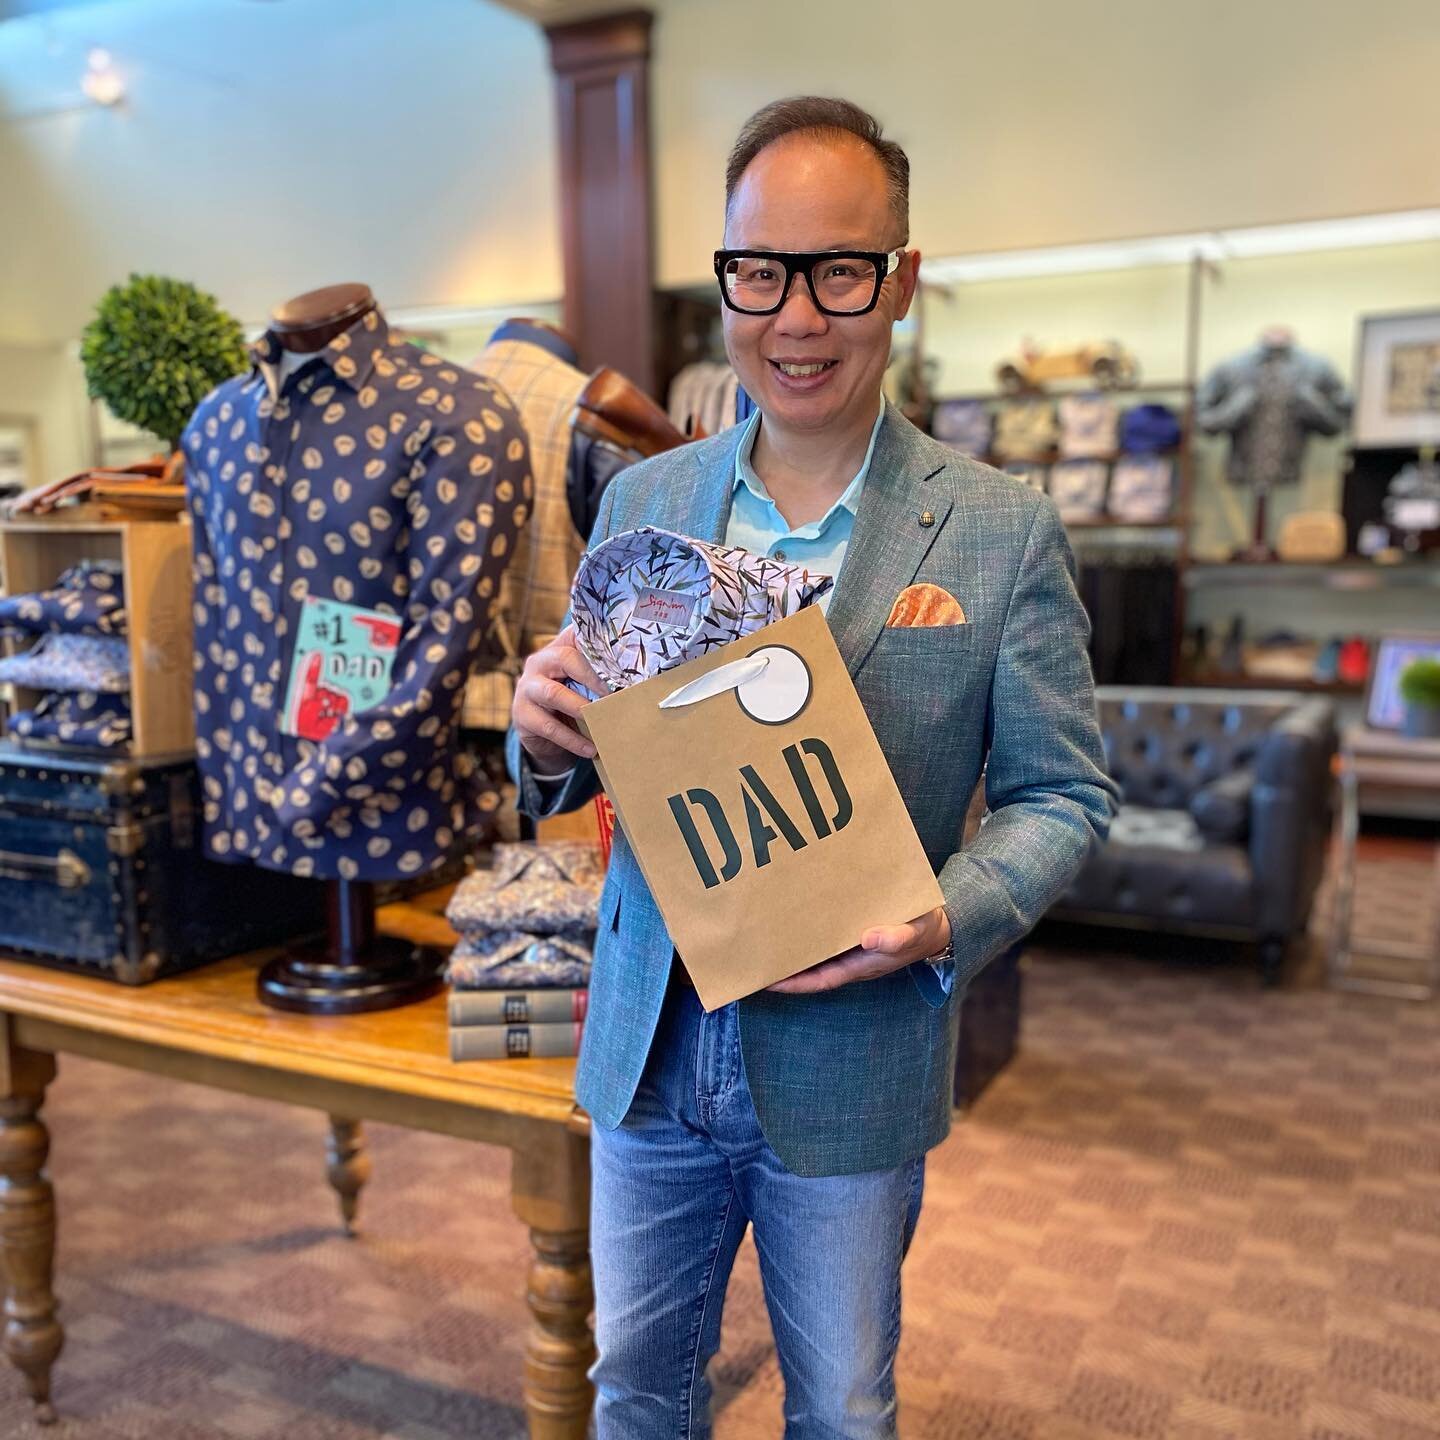 The staff ran around picking some of their picks for #FathersDay 
Ken picked a great shirt from Signum. ➡️
Mark thought it was a good idea to protect yourself from the sun and chose a colourful fun chapeau from #magillhats ☀️➡️
Christine thought the 